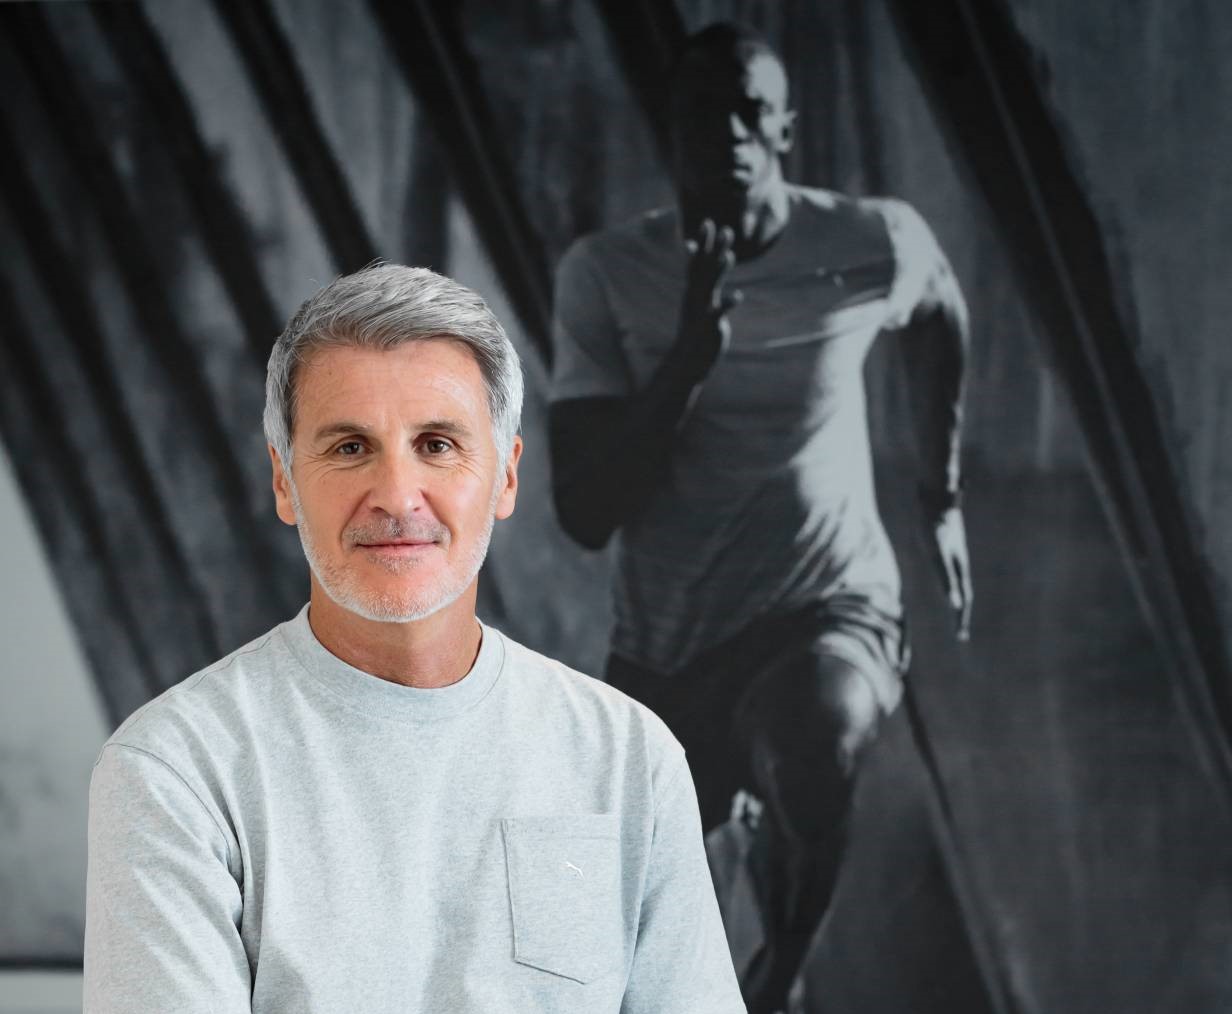 As part of the implementation of its strategic priorities, German sports company PUMA is reorganizing the global Marketing Organization. PUMA’s Regional General Manager Europe Richard Teyssier will lead the Global Marketing Organization as Global Brand & Marketing Director, effective 1 July 2023